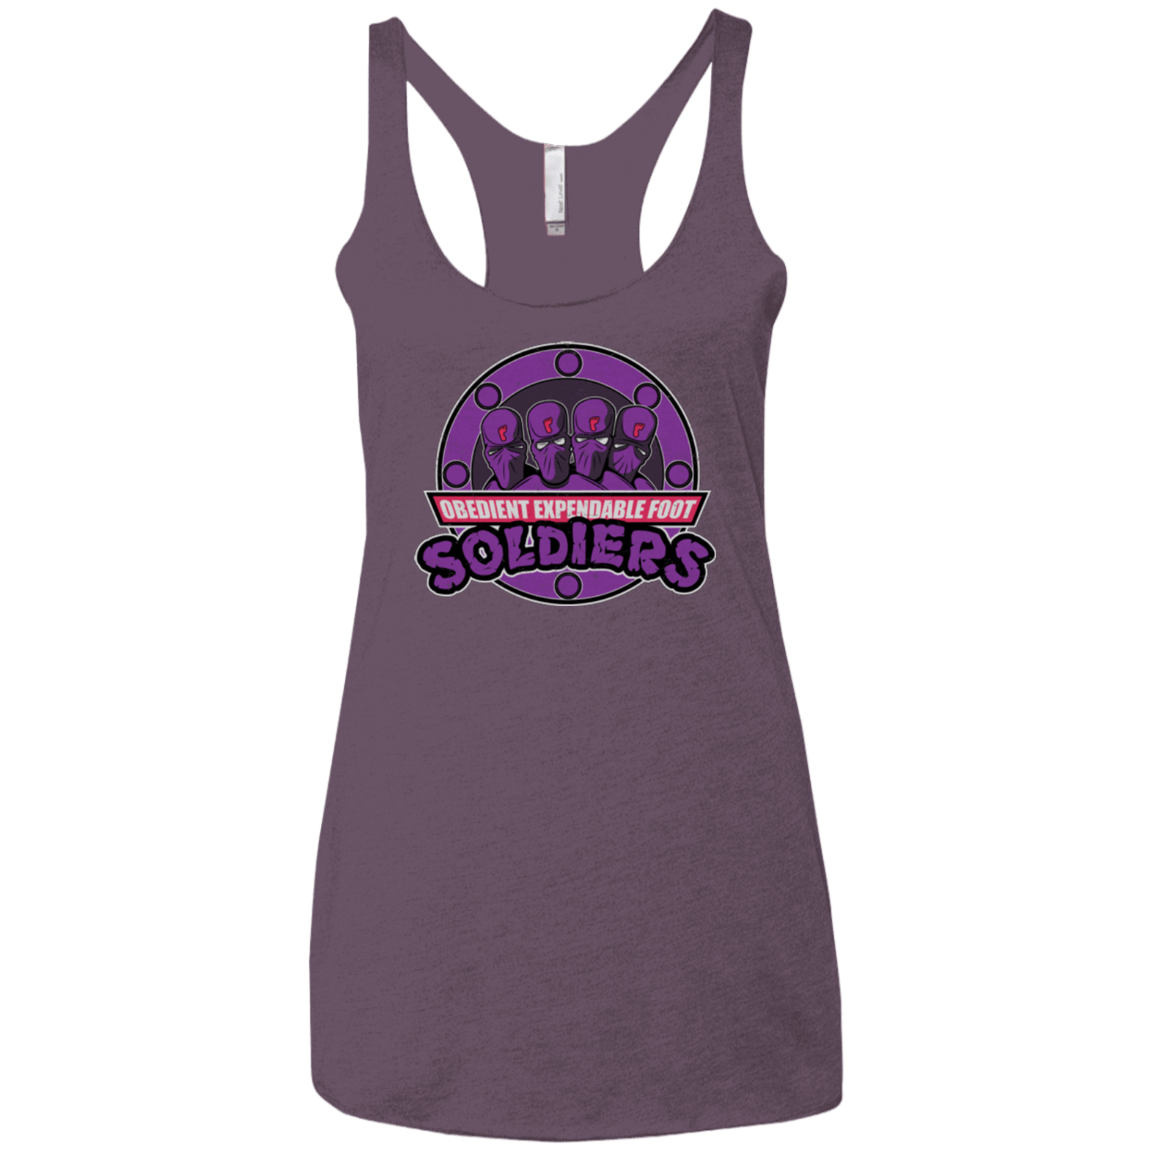 OBEDIENT EXPENDABLE FOOT SOLDIERS Women's Triblend Racerback Tank